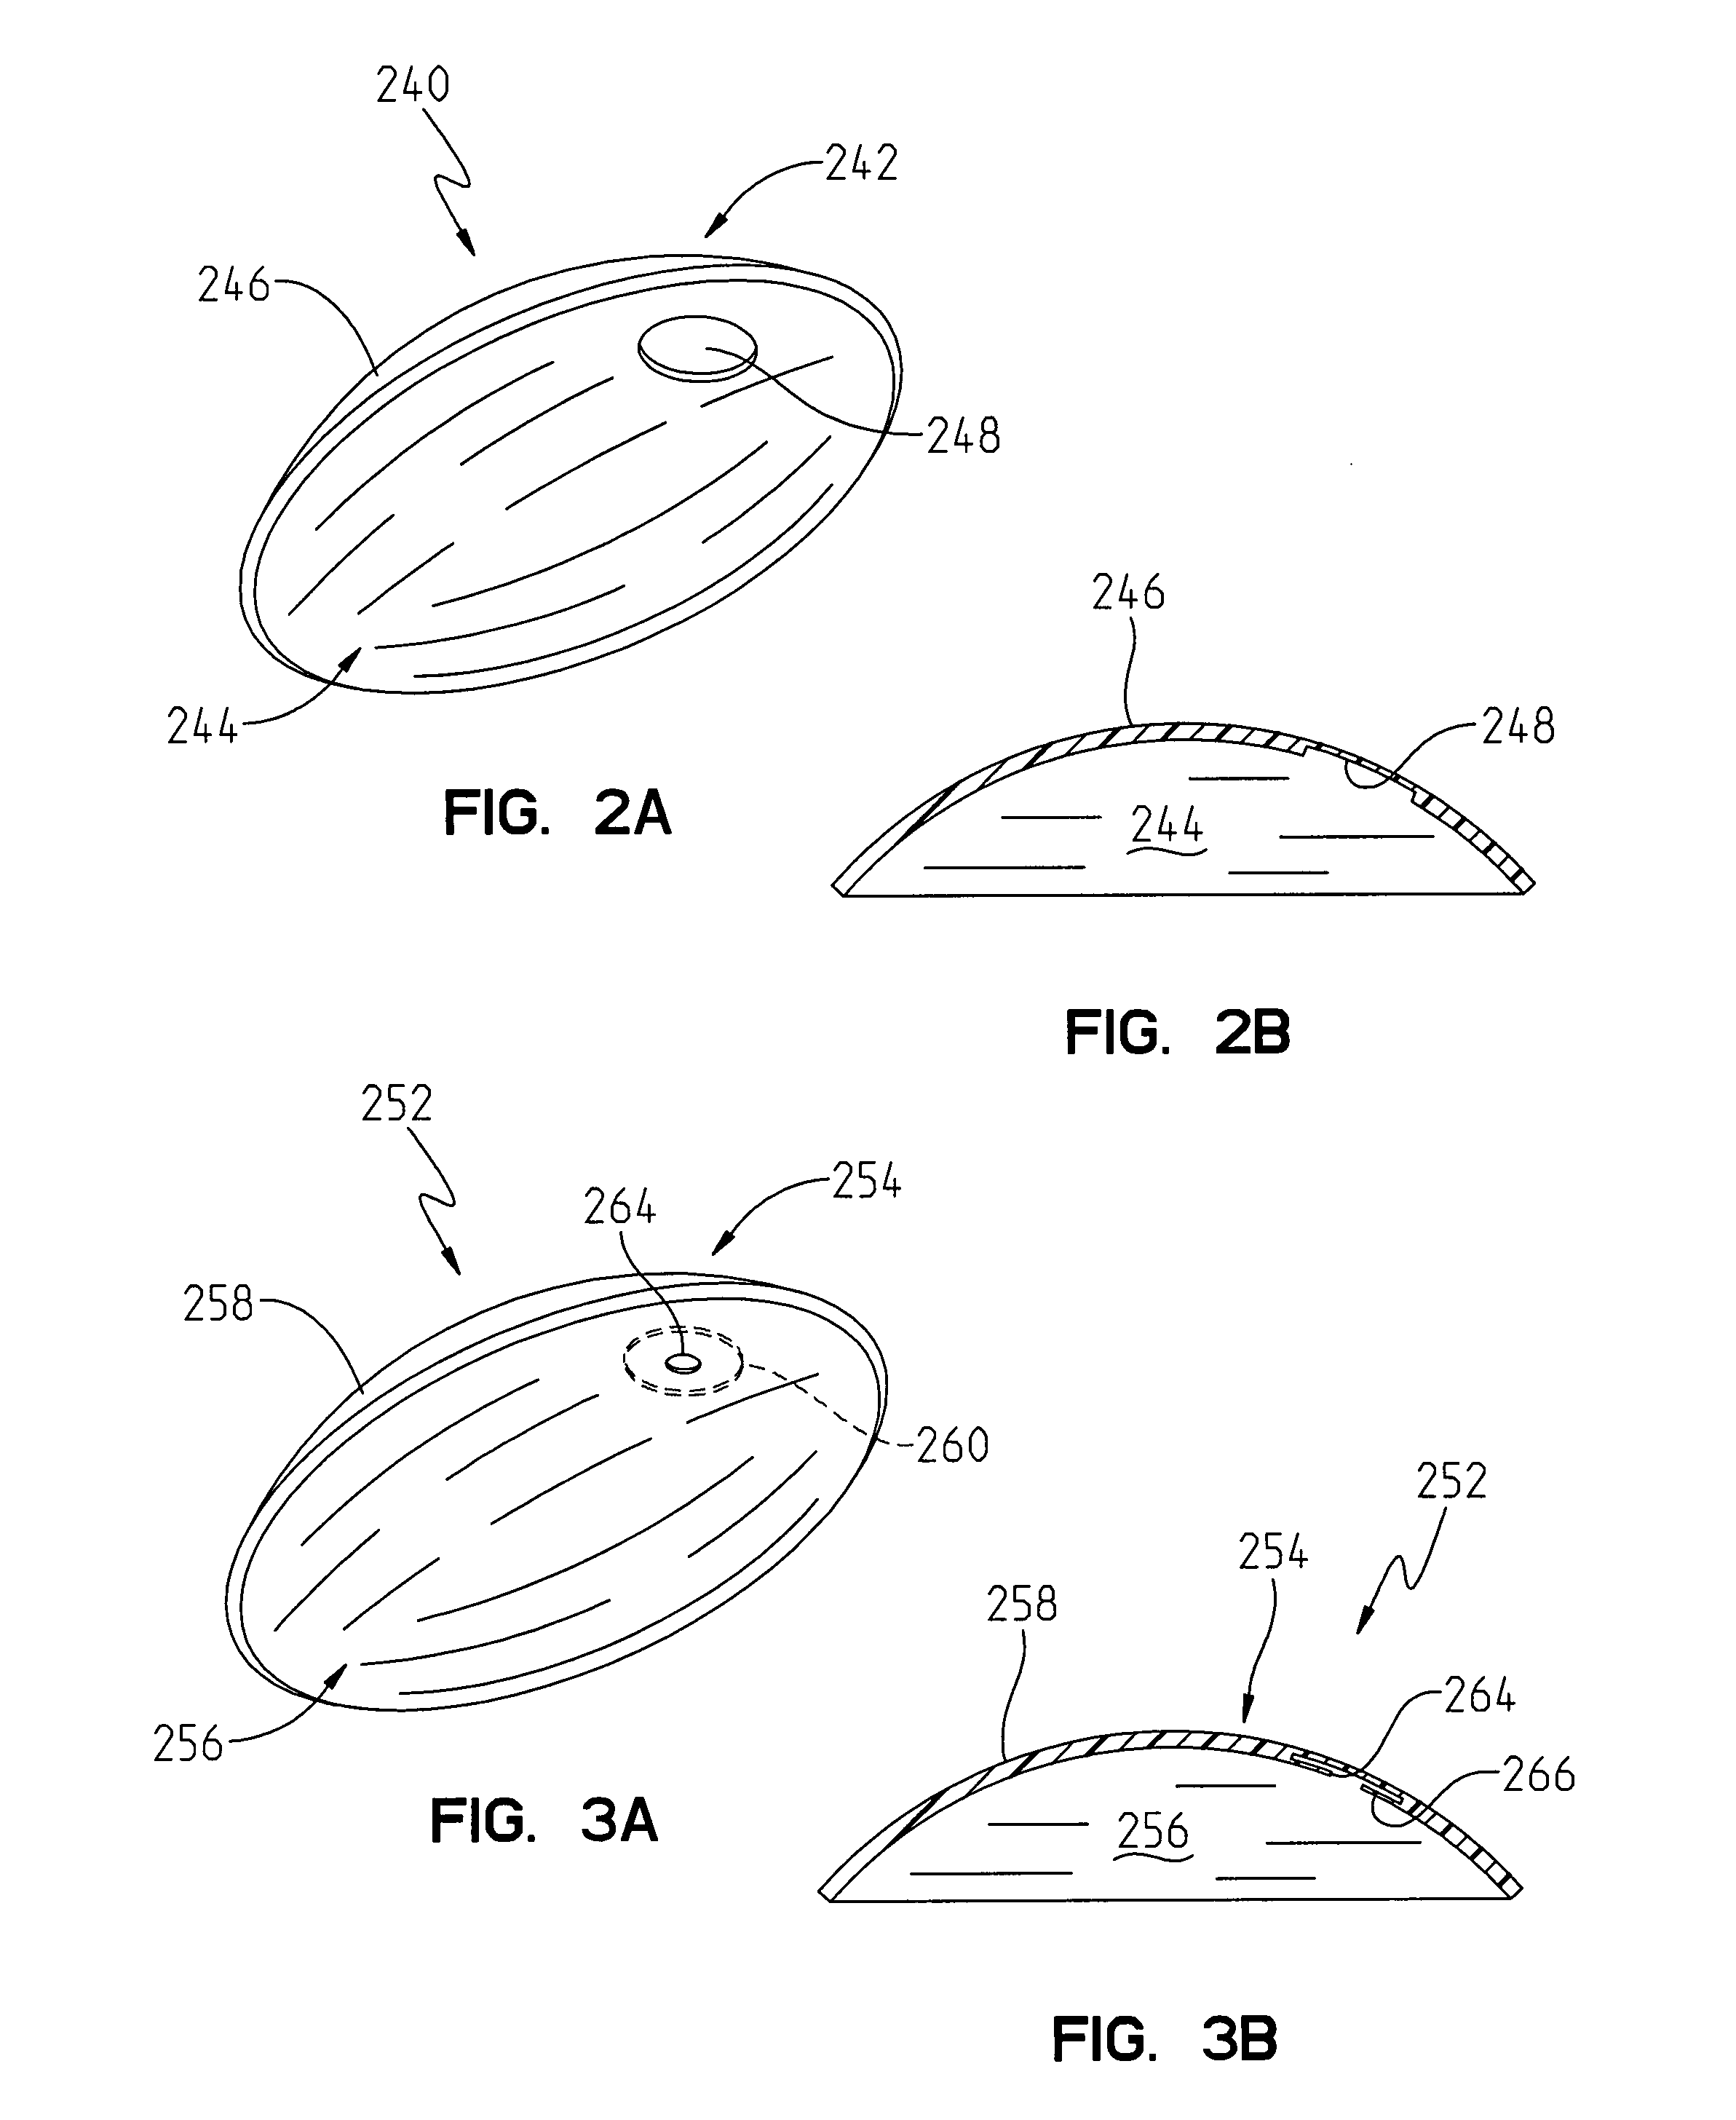 Contact lens materials, designs, substances, and methods